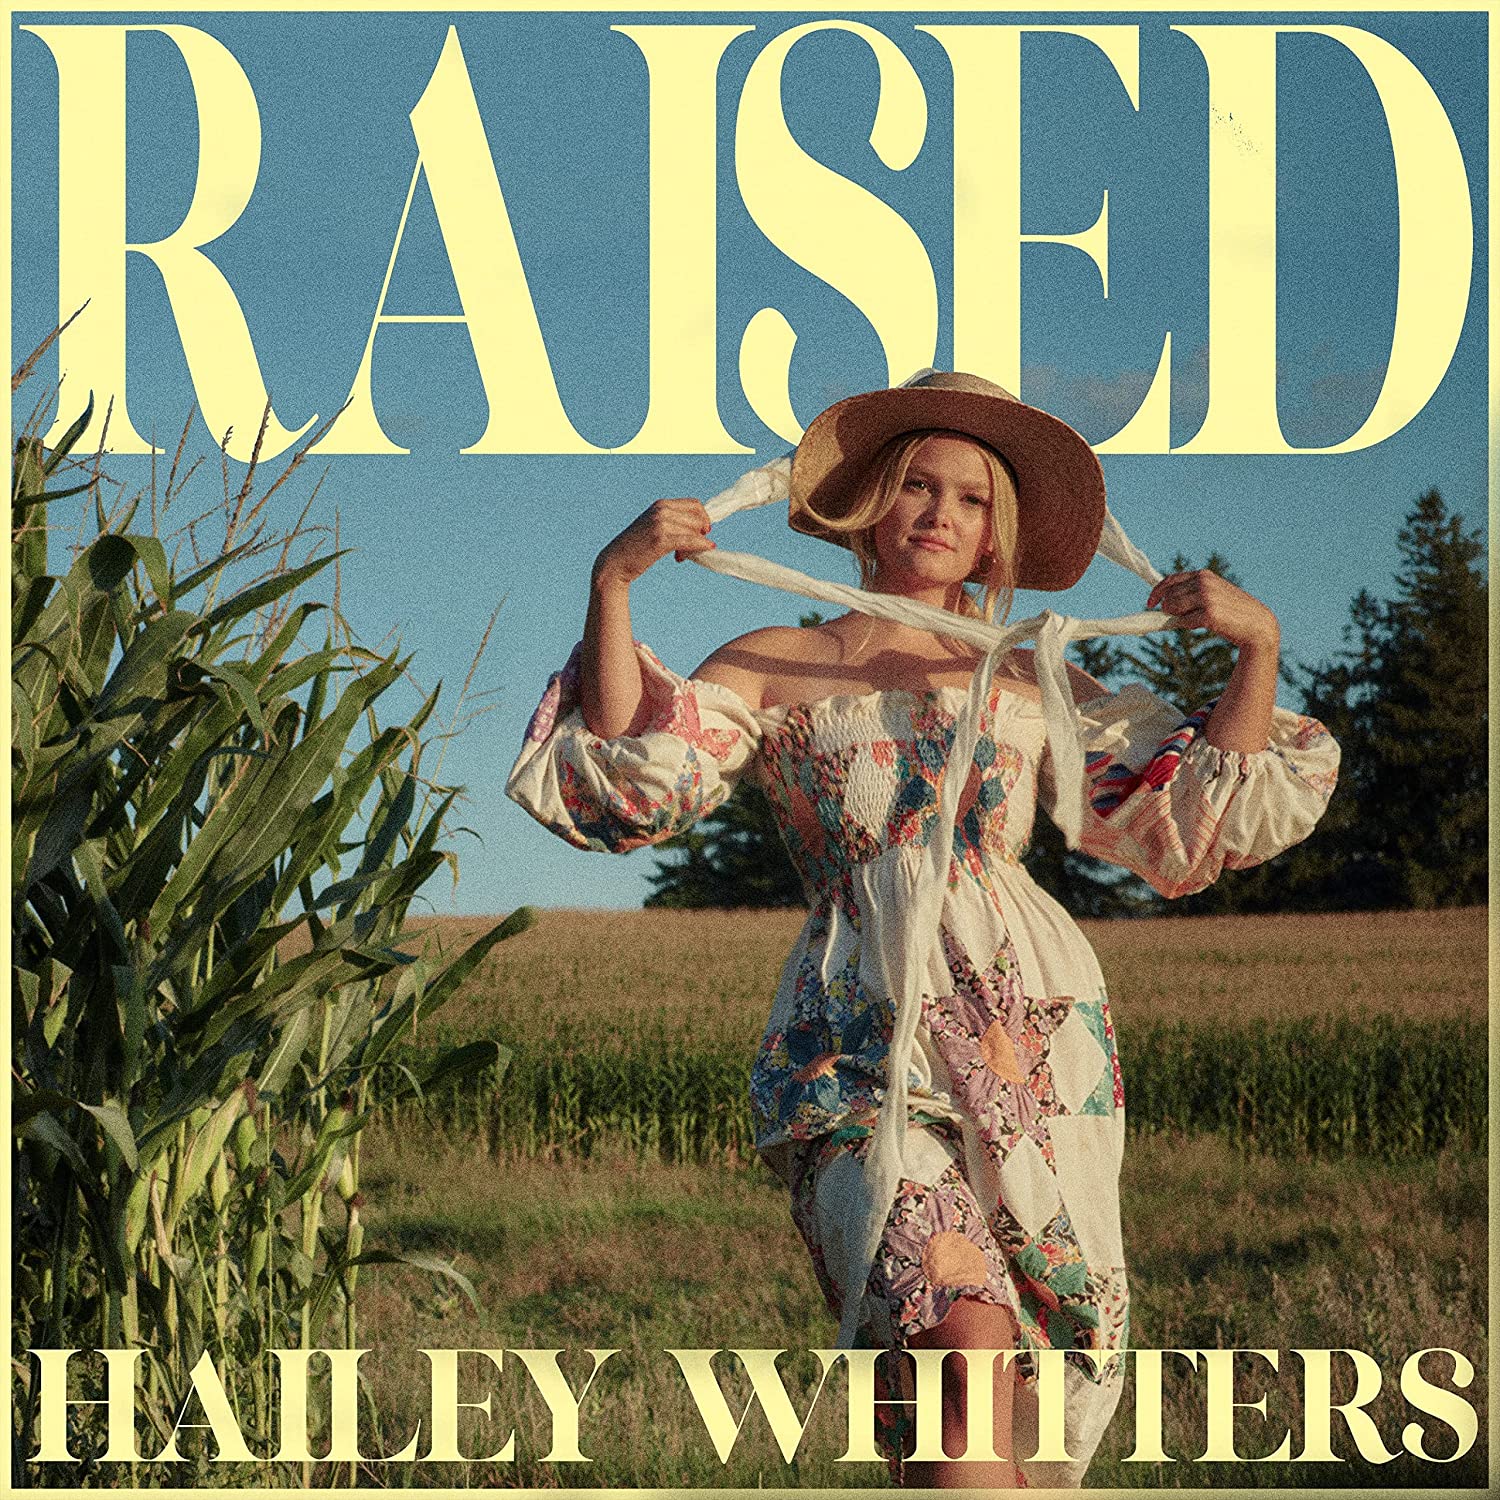 Hailey Whitters — The Neon cover artwork